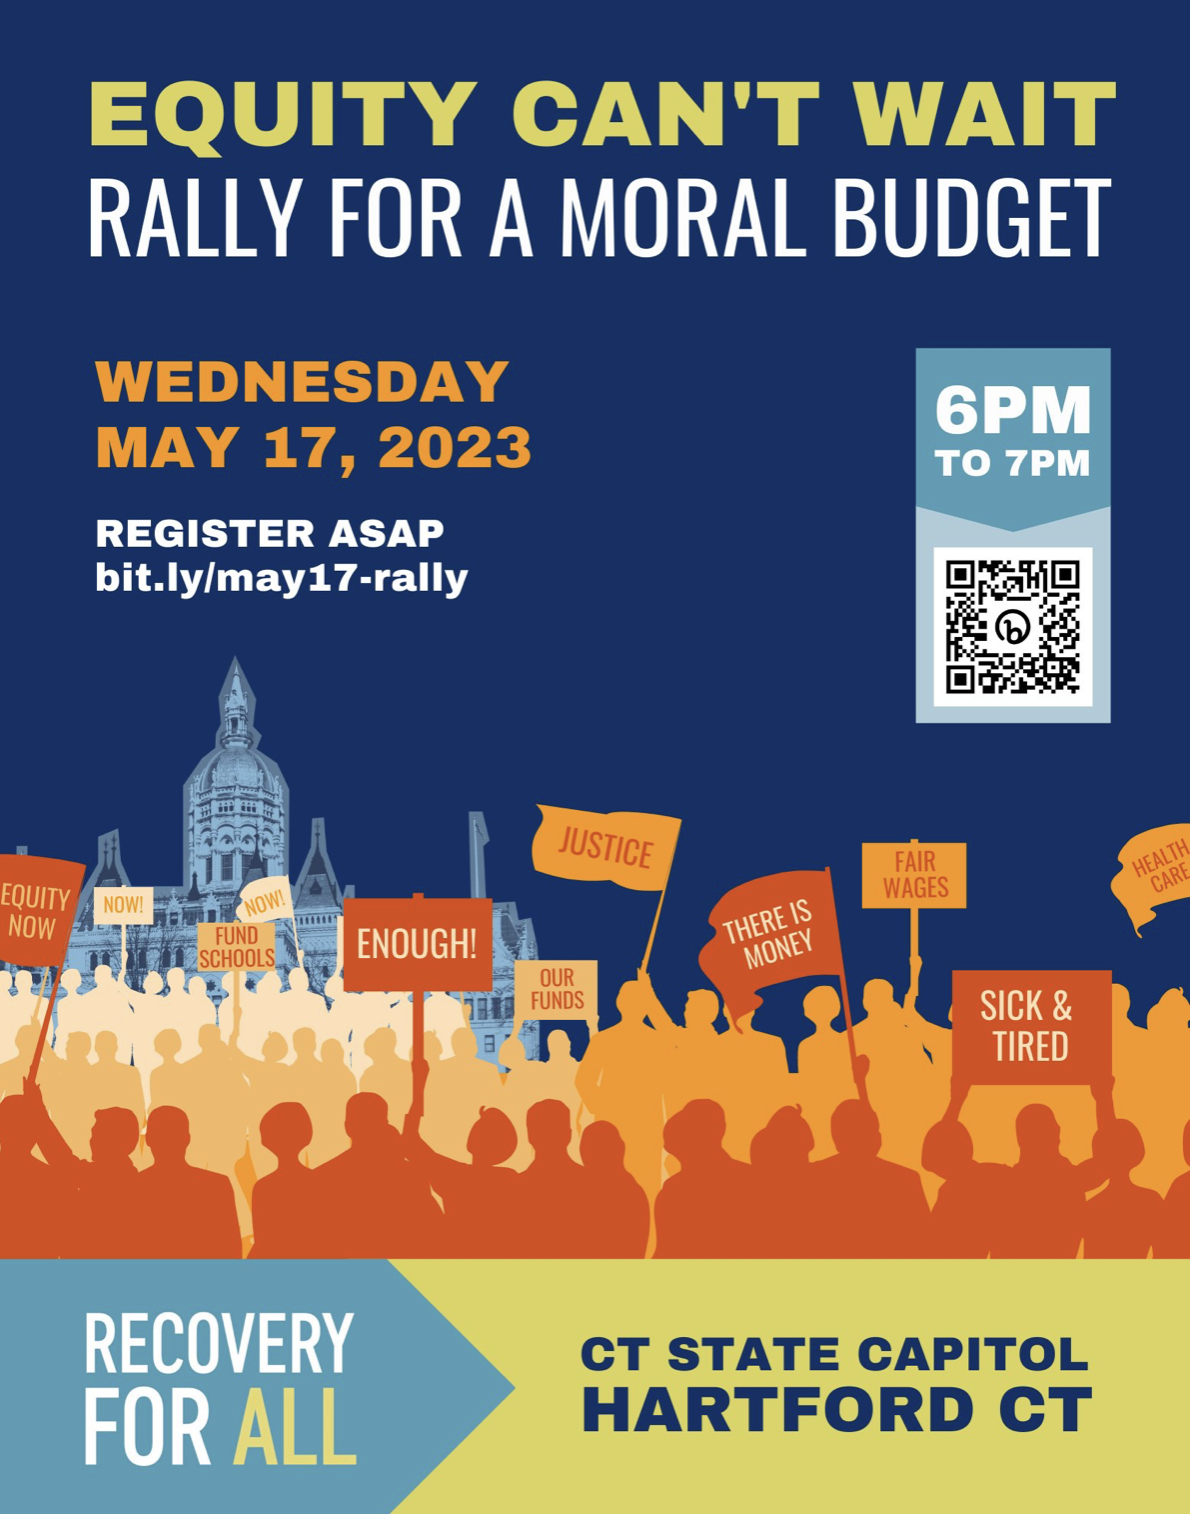 Communists, Big Labor & Other Groups will Rally to Demand ‘Moral Budget’